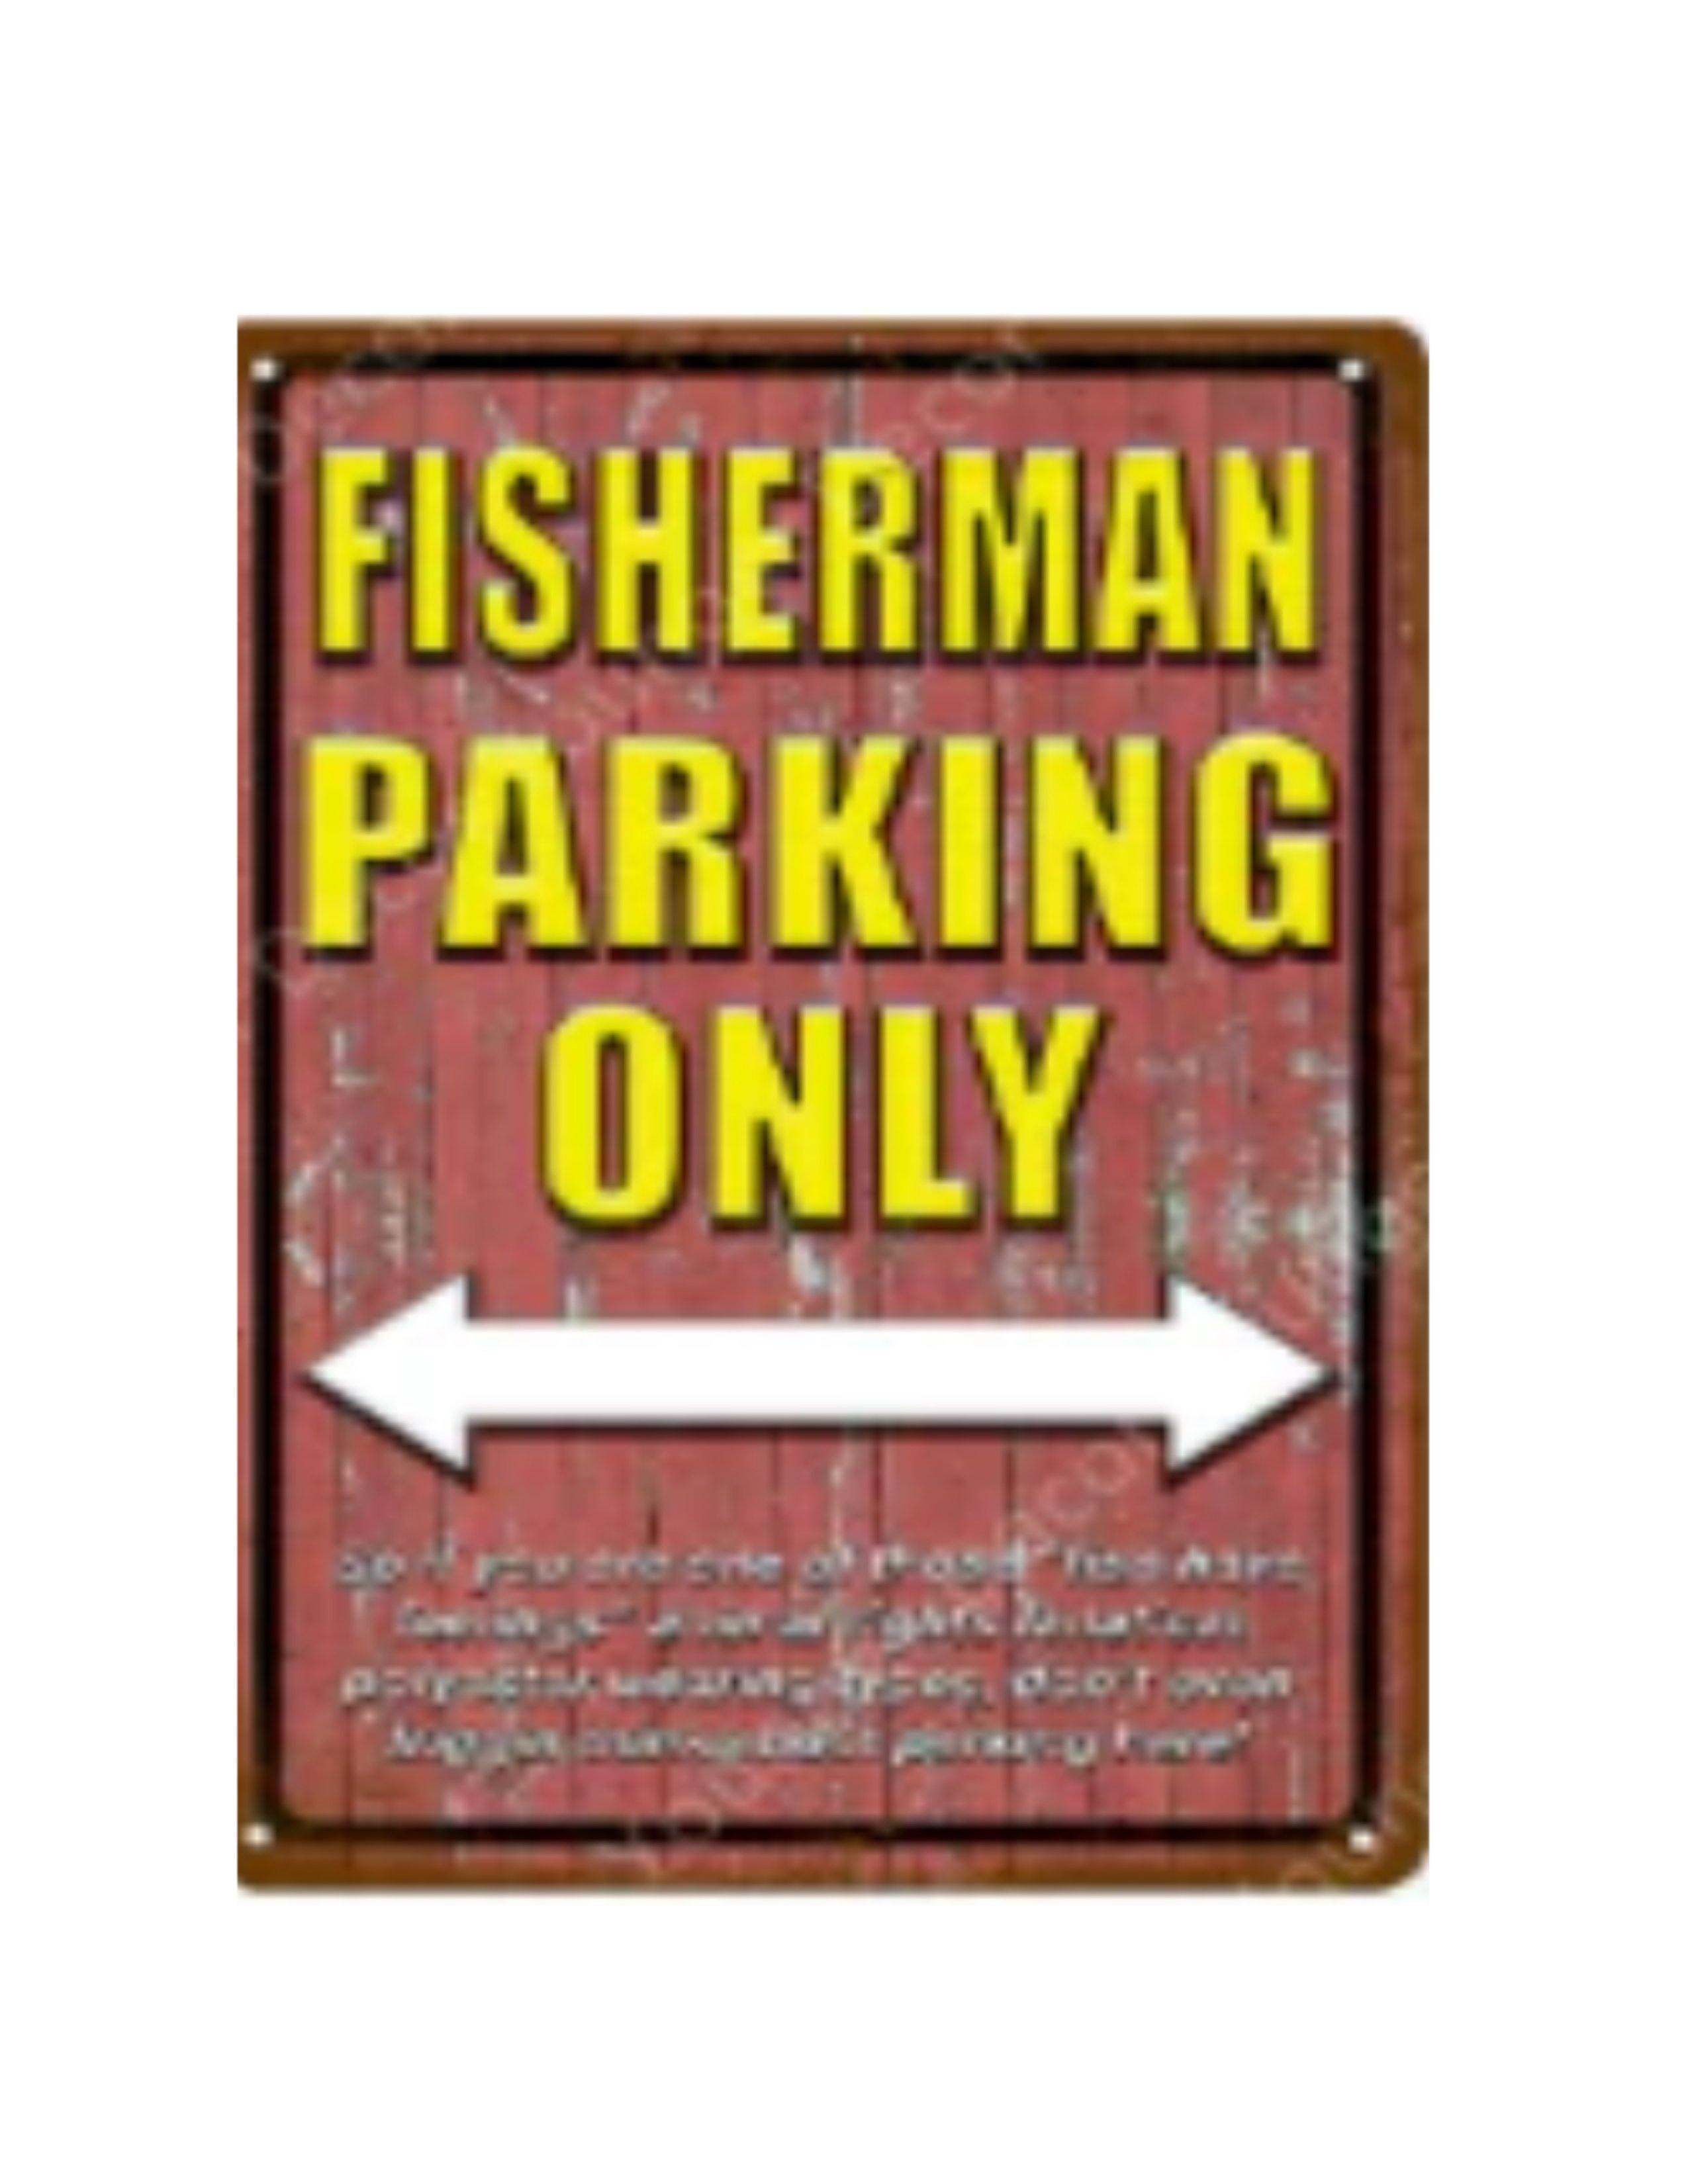 Metal Tin Sign - Fisherman Parking Only - Leapfrog Outdoor Sports and Apparel